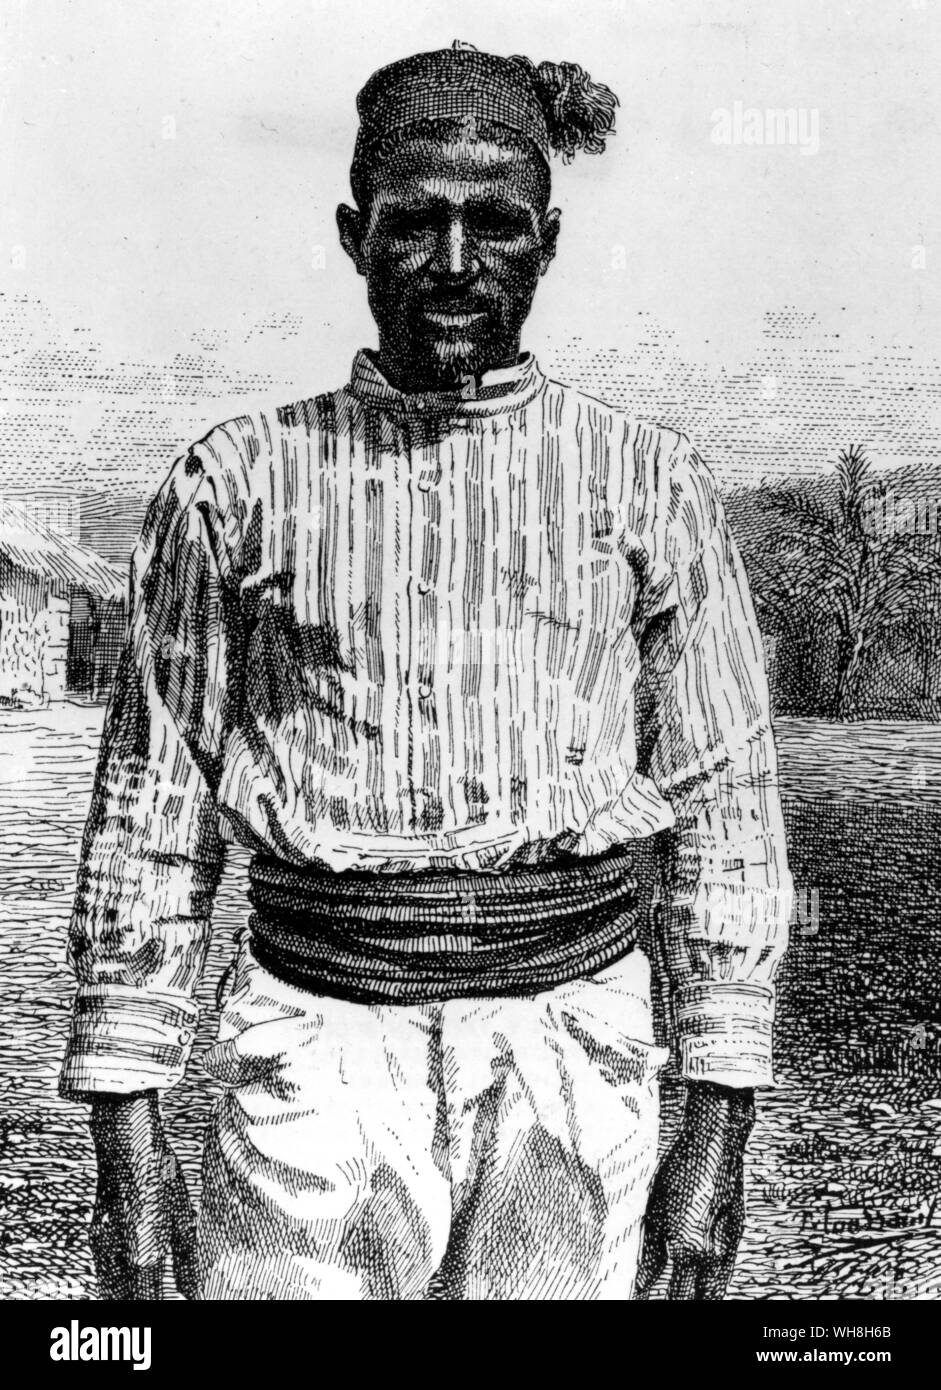 Sergeant Malamine Kamara. The African Adventure - A History of Africa's Explorers by Timothy Severin, page 268. Stock Photo